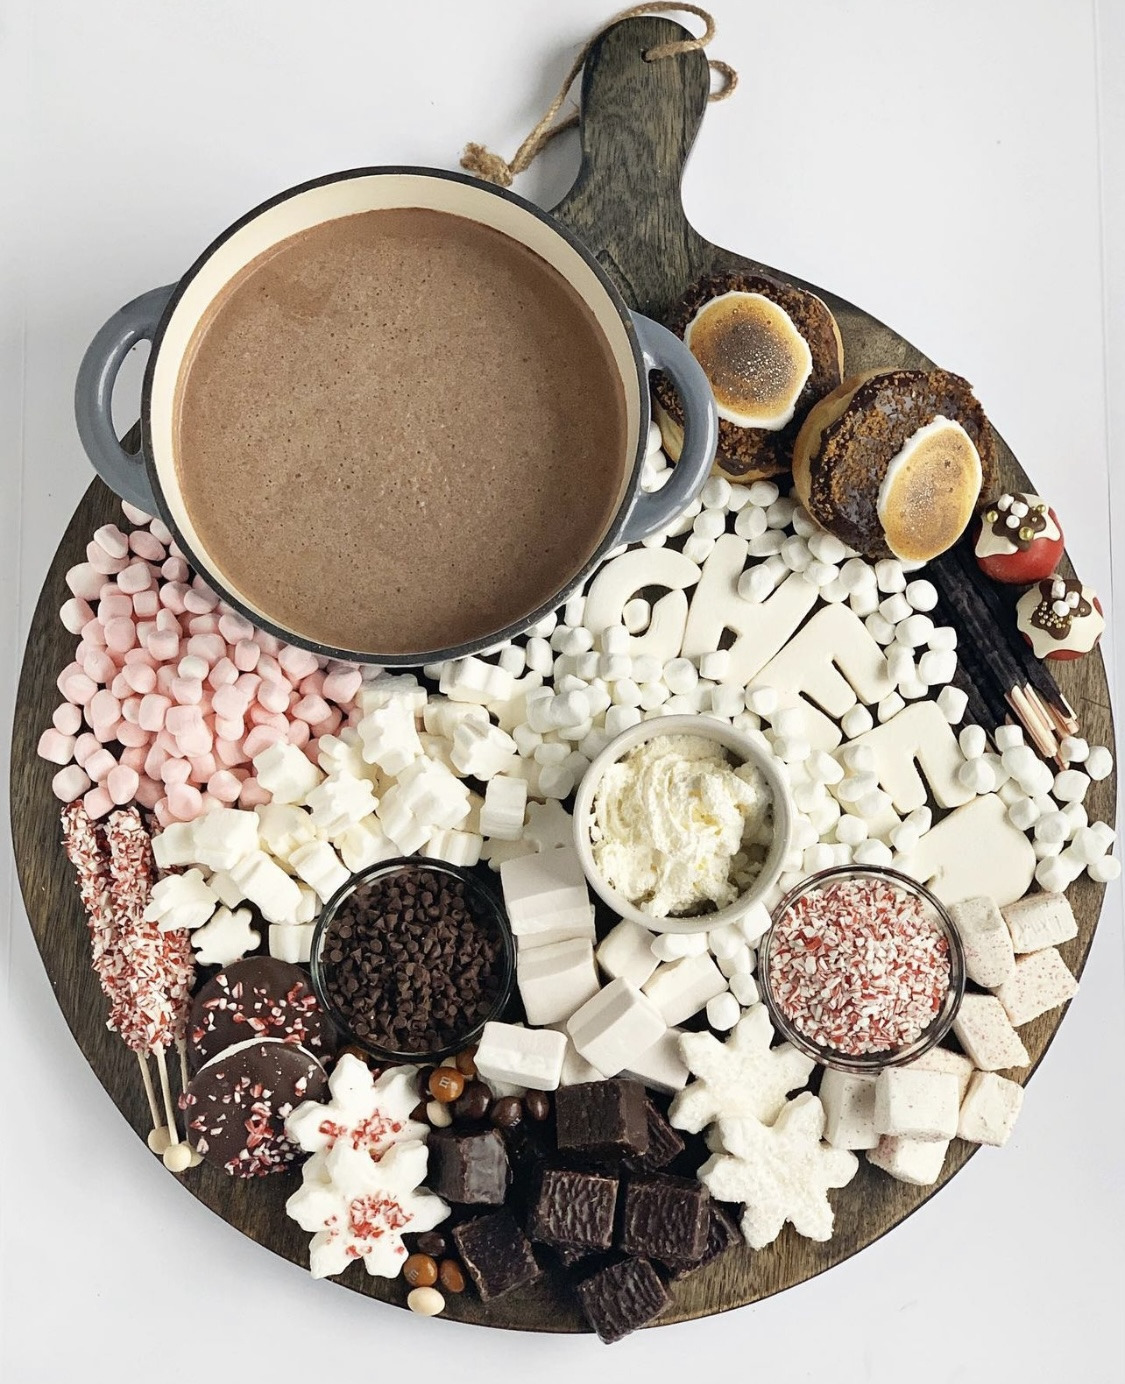 Hot Chocolate Toppings Galore